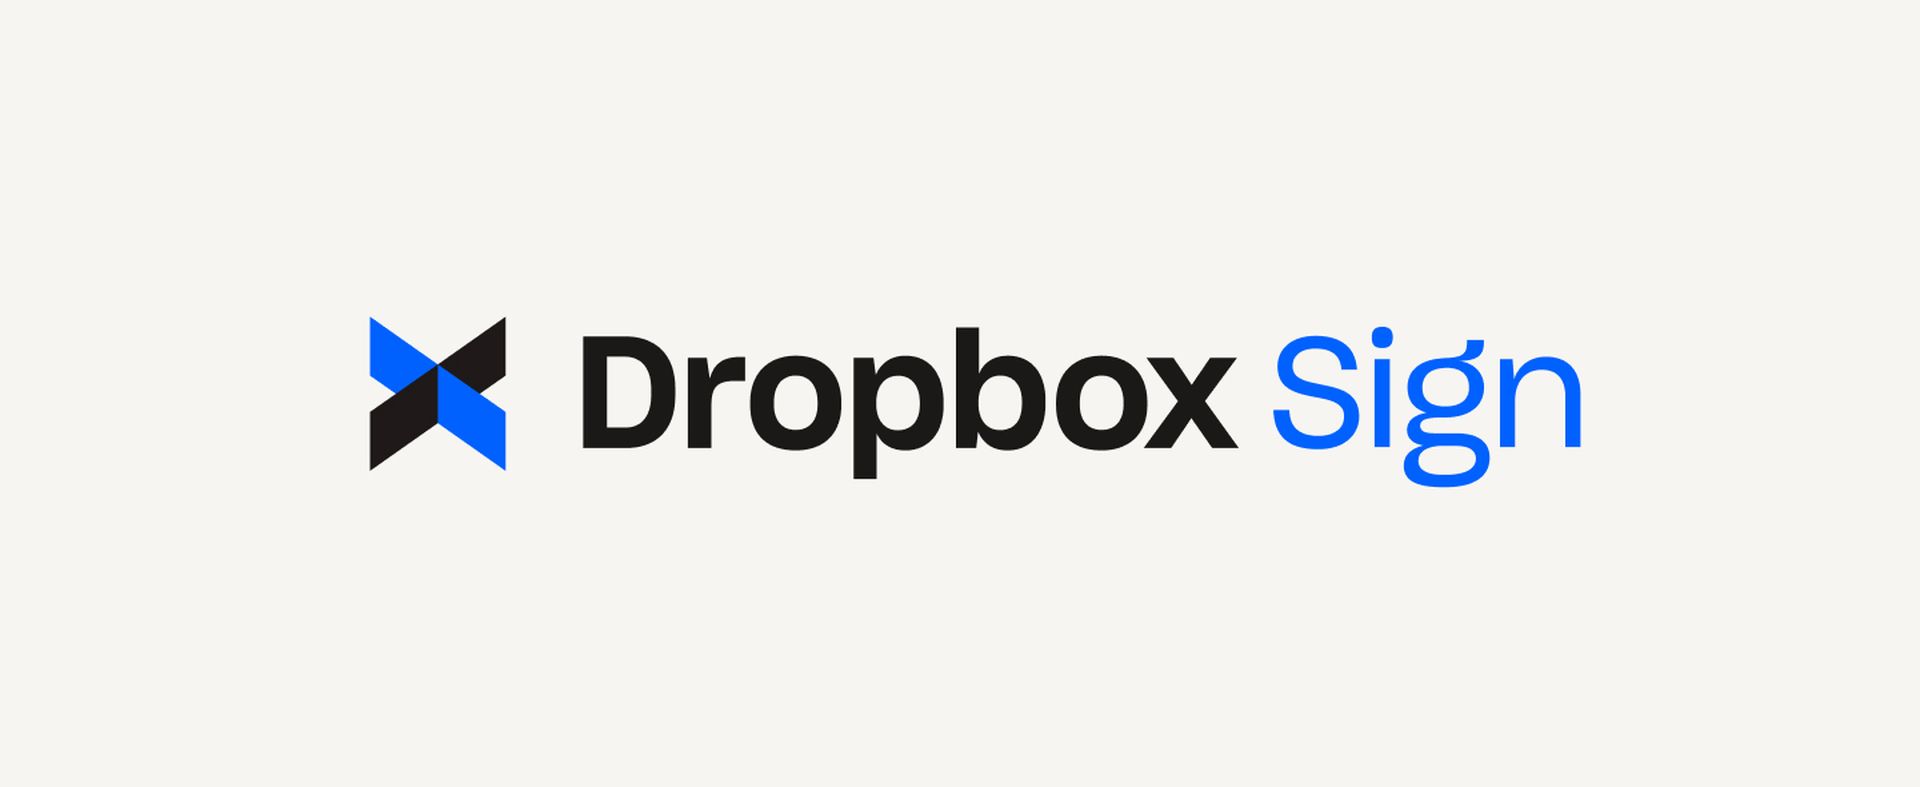 The Dropbox Sign attack: A deep dive into data security and implications